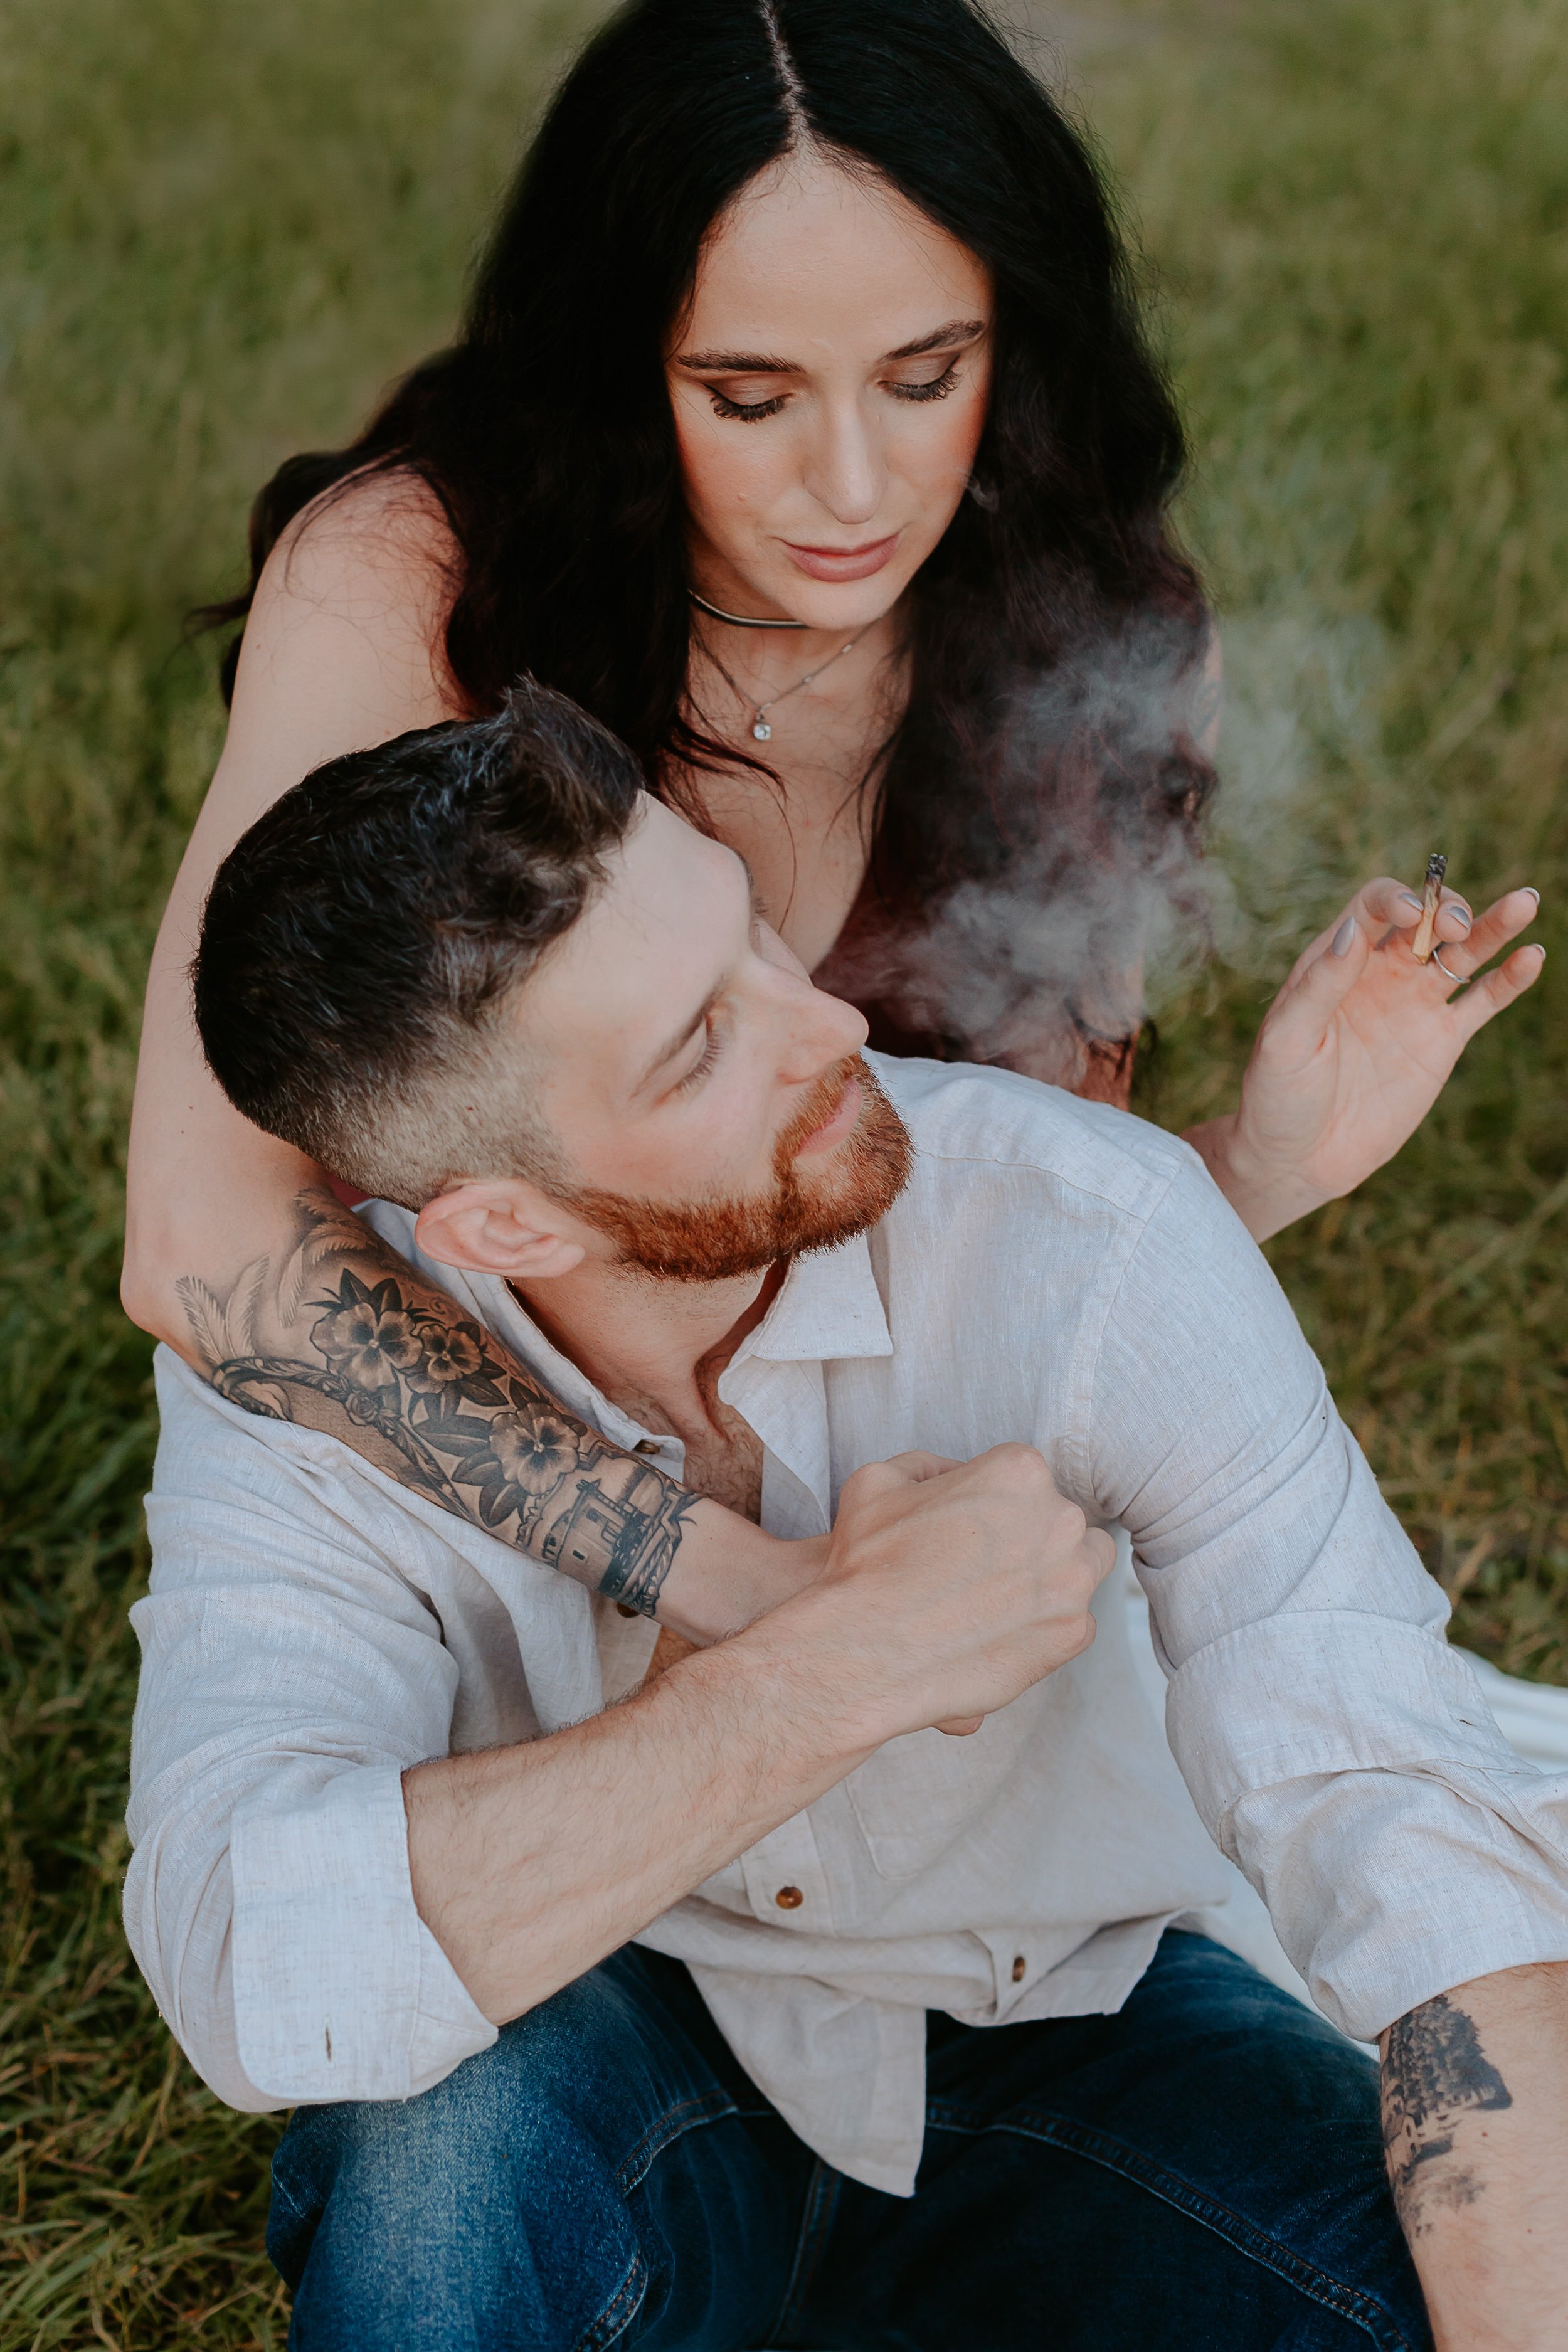 Woman and man smoke a joint together.